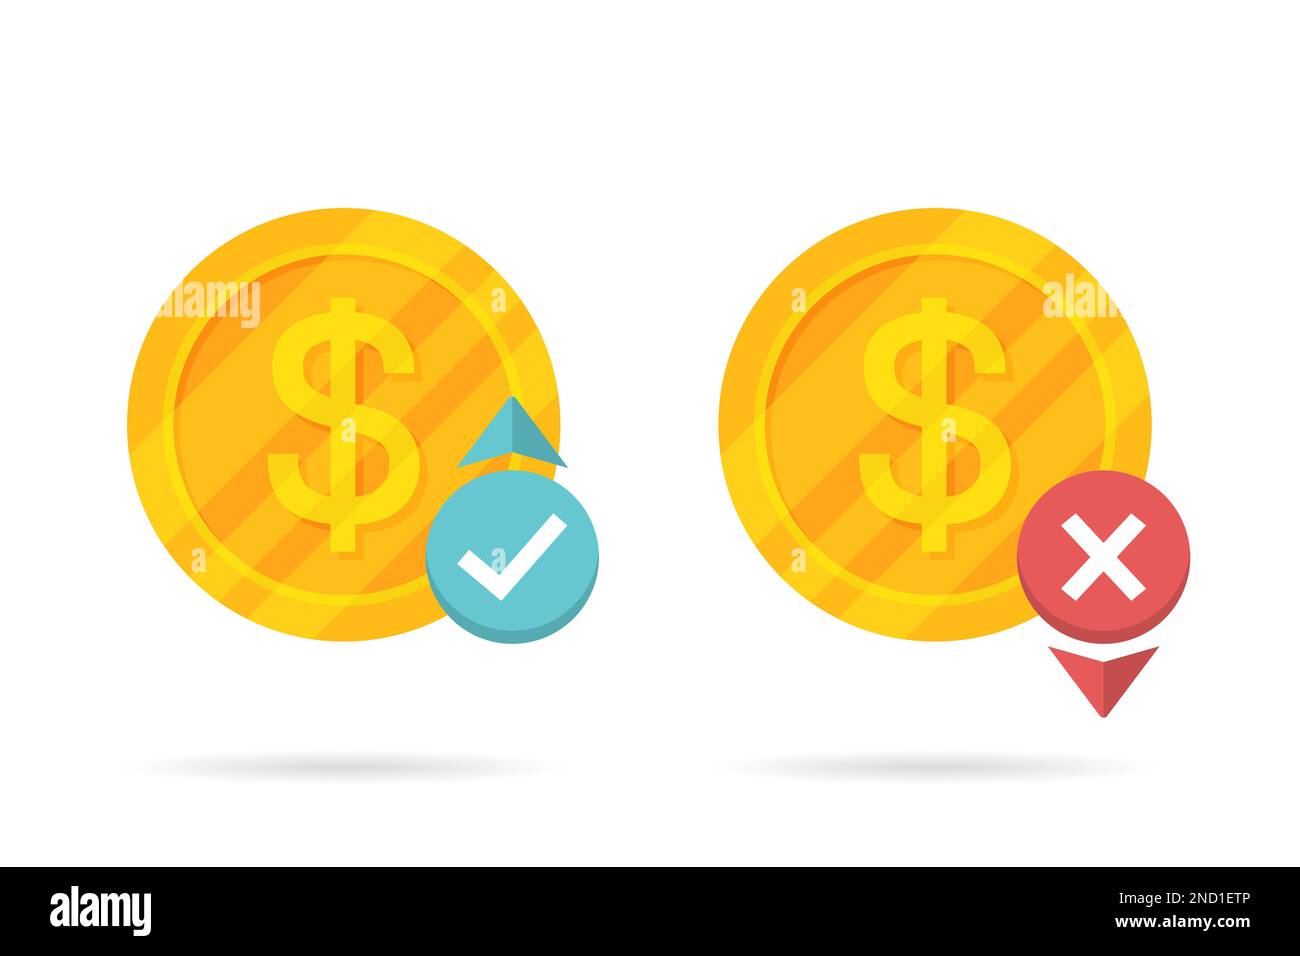 Up and down dollar money icon with shadow Stock Vector